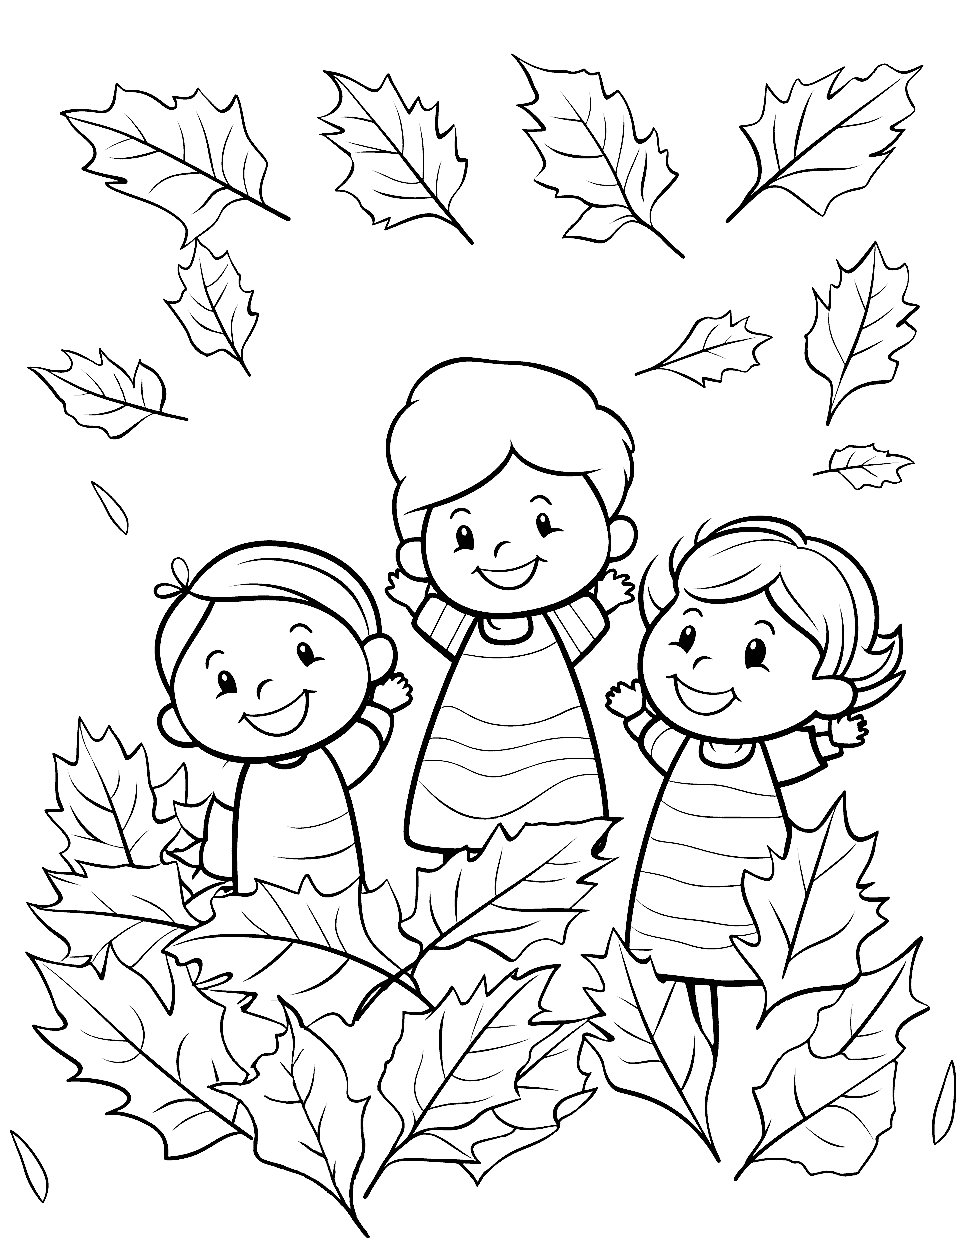 Children's Fall Fun Coloring Page - A simple design of children playing in a pile of leaves, welcoming the fall season.